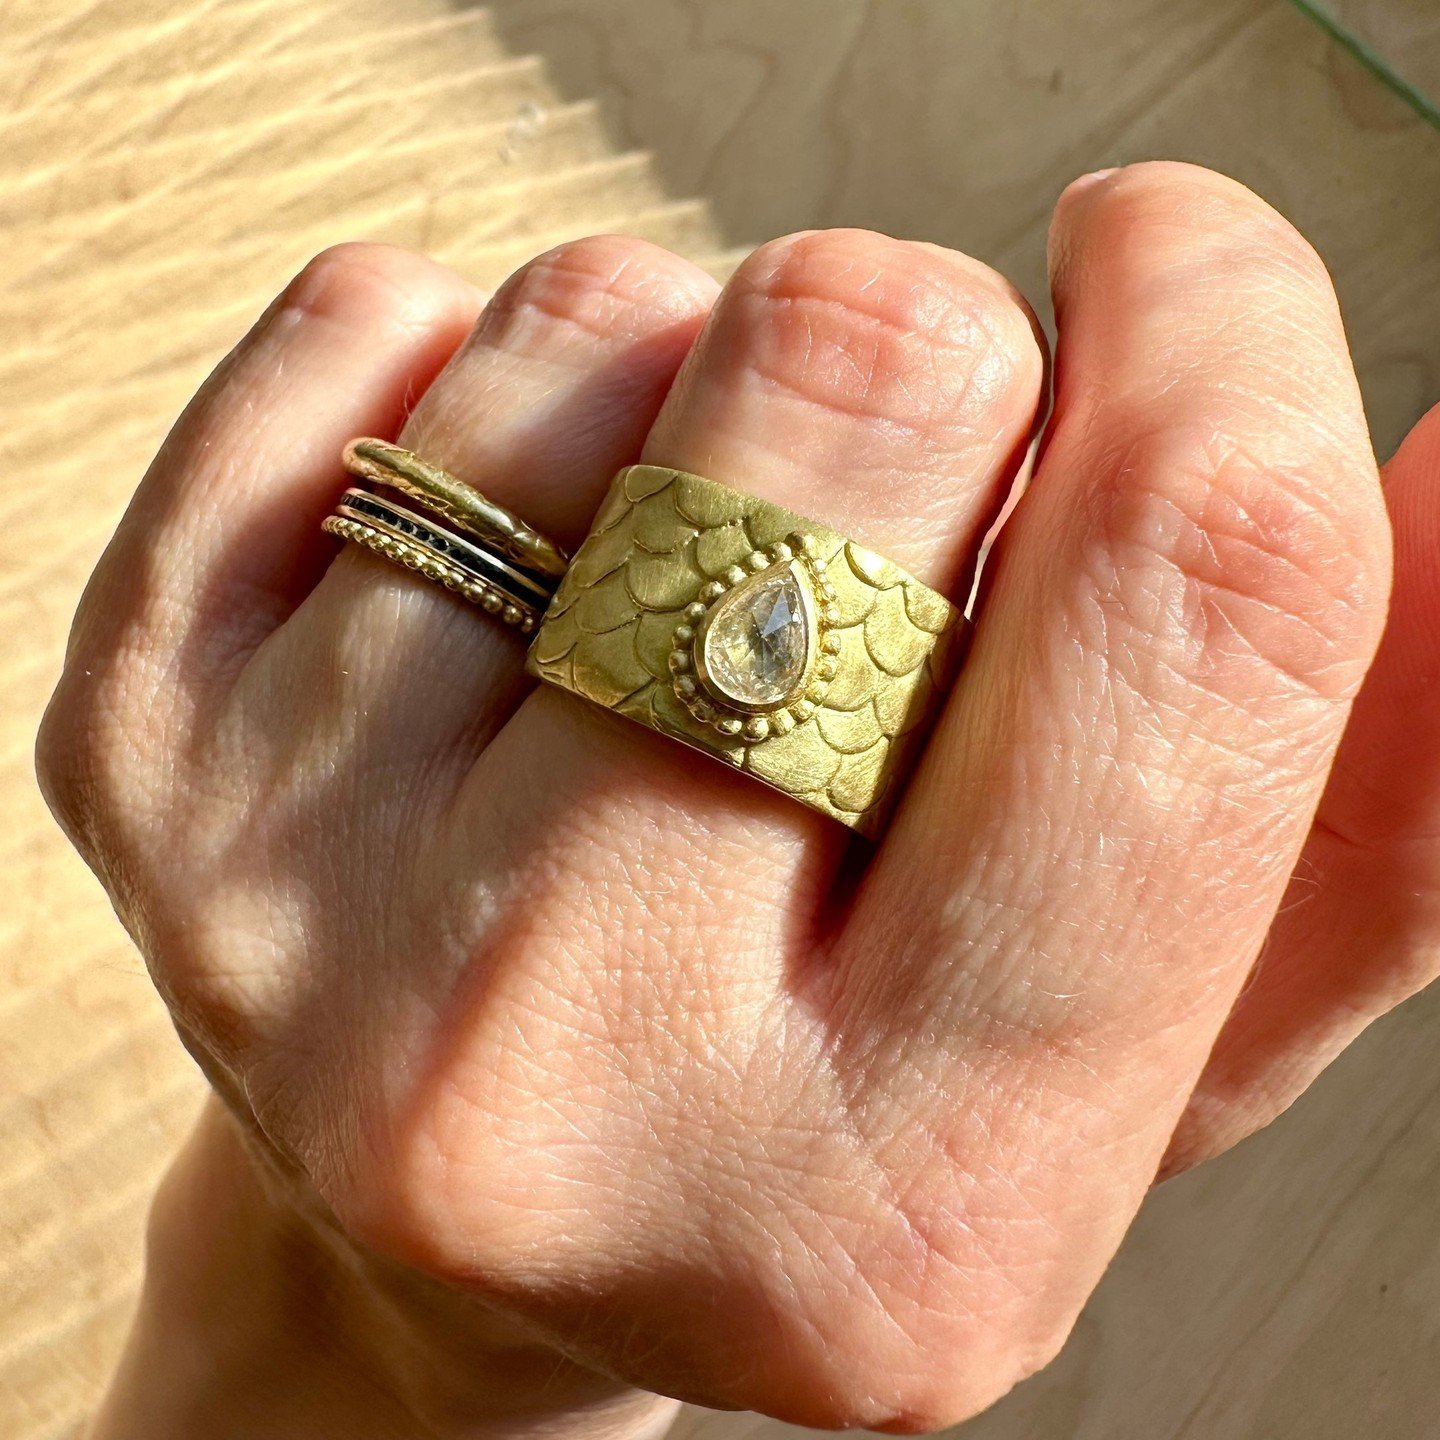 We love a celebration and creating the perfect memento for any occasion. This snug ring is a beautiful example of just that; alluring Fairtrade gold envelopes the wearer's finger to make the show-stopping Snug ring. This bold new design is topped wit